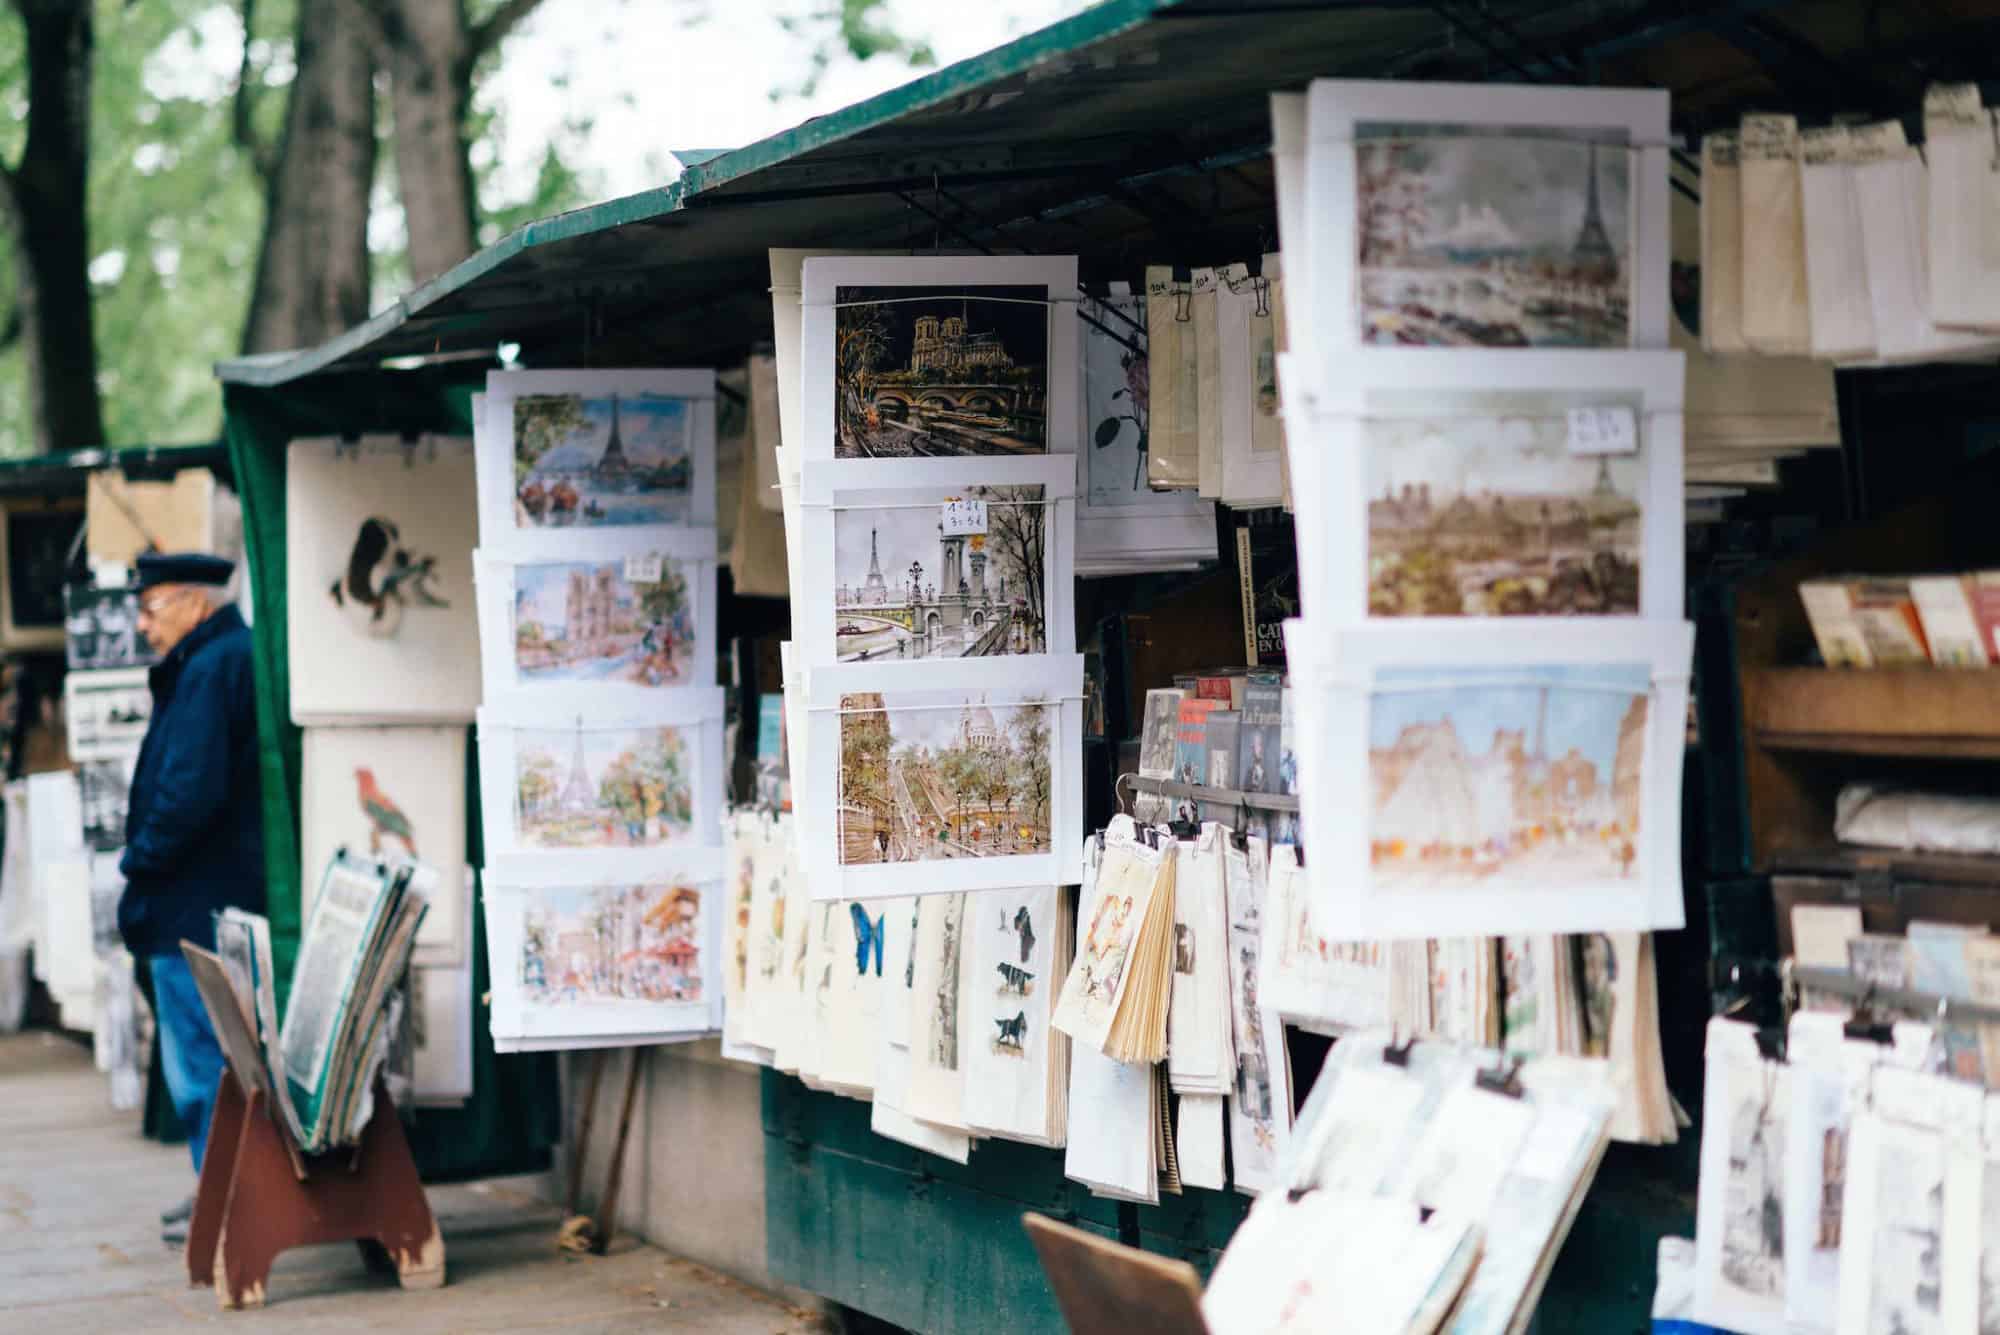 An old man stands by stalls of art near the Seine in Pairs. Beautiful paintings that display scenes of Paris can be seen hanging from the stalls.